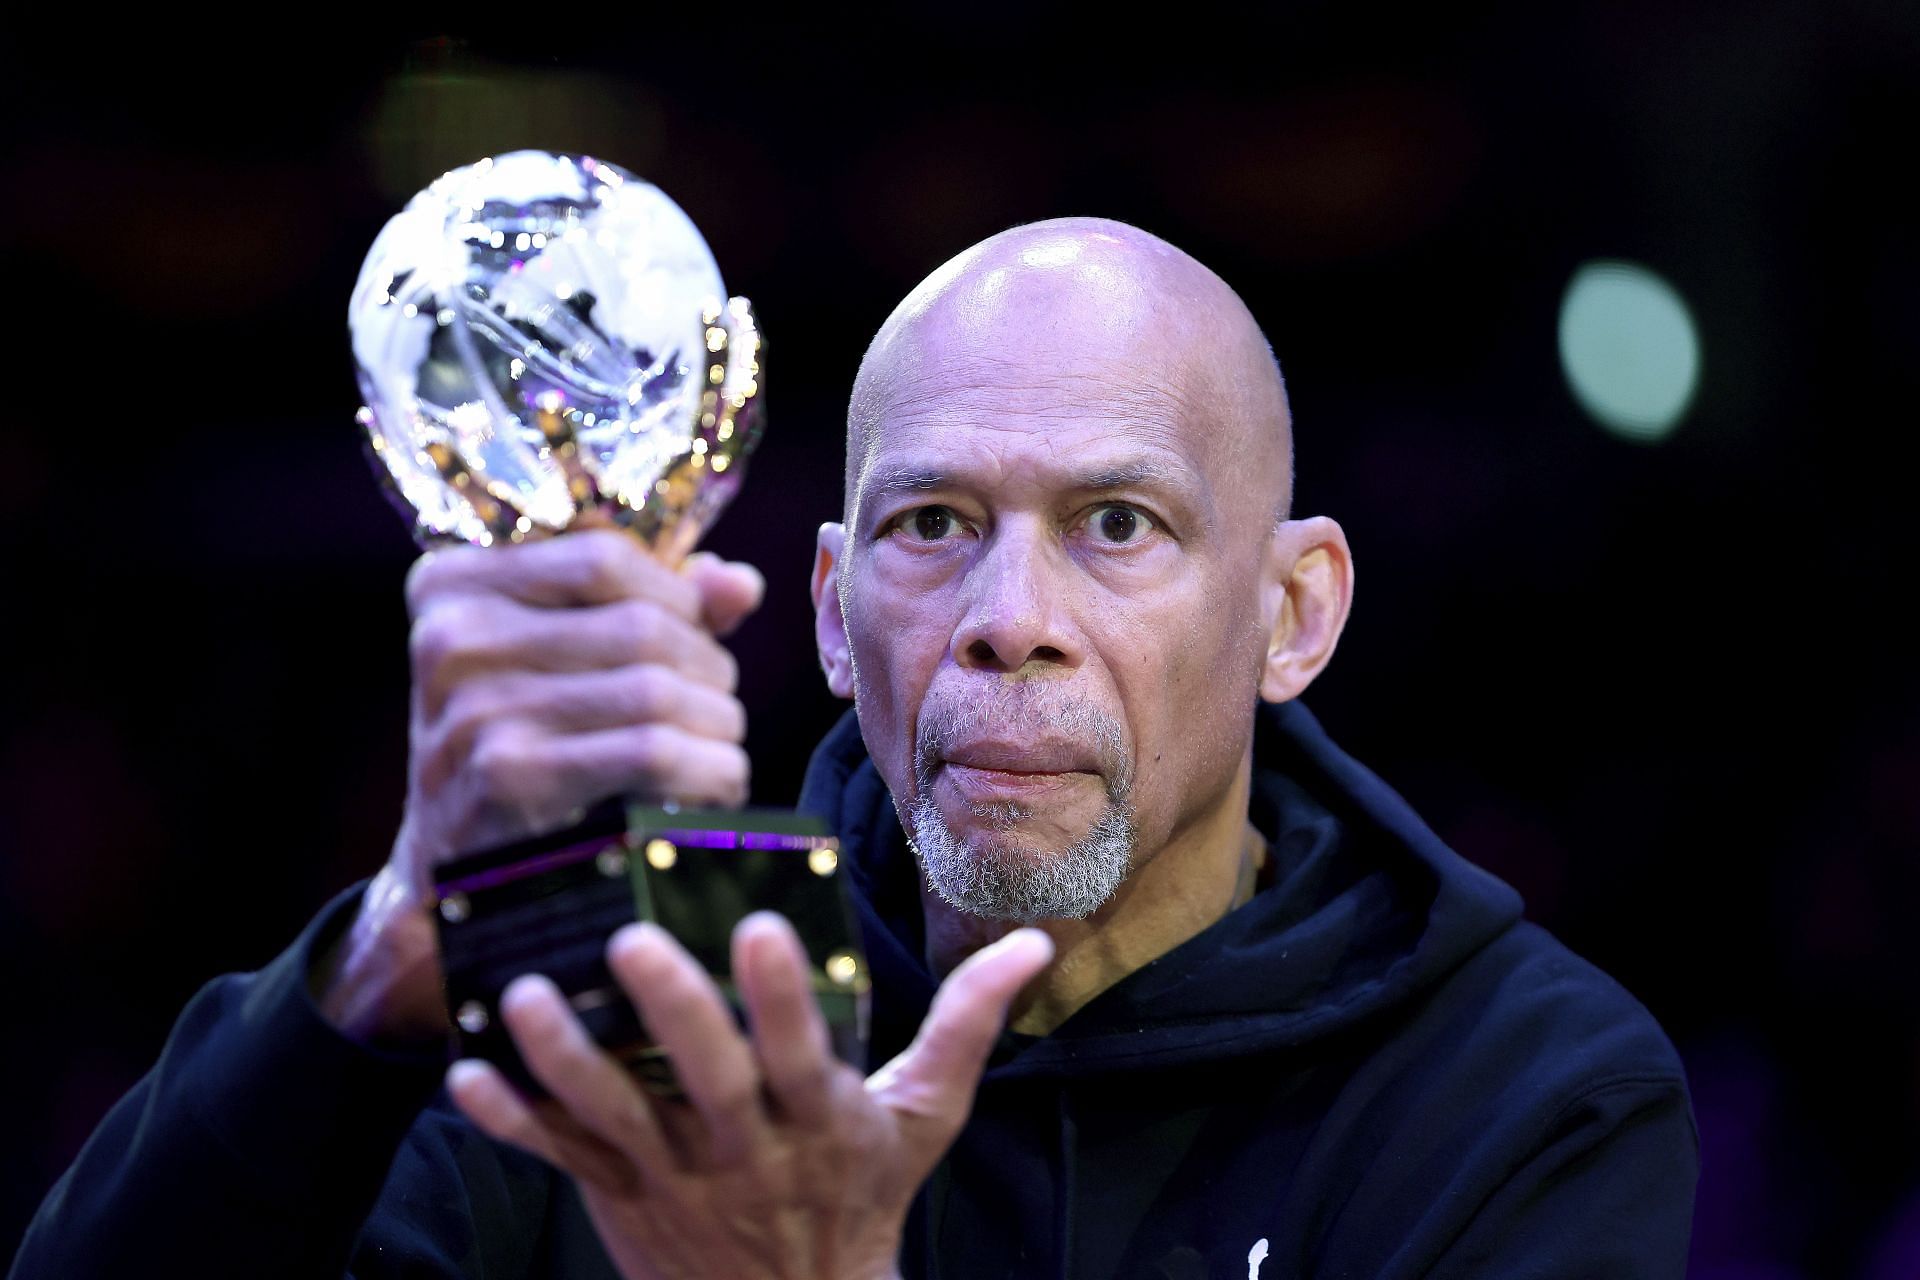 Abdul-Jabbar achieved a lot during his 20-year NBA career (Image via Getty Images)